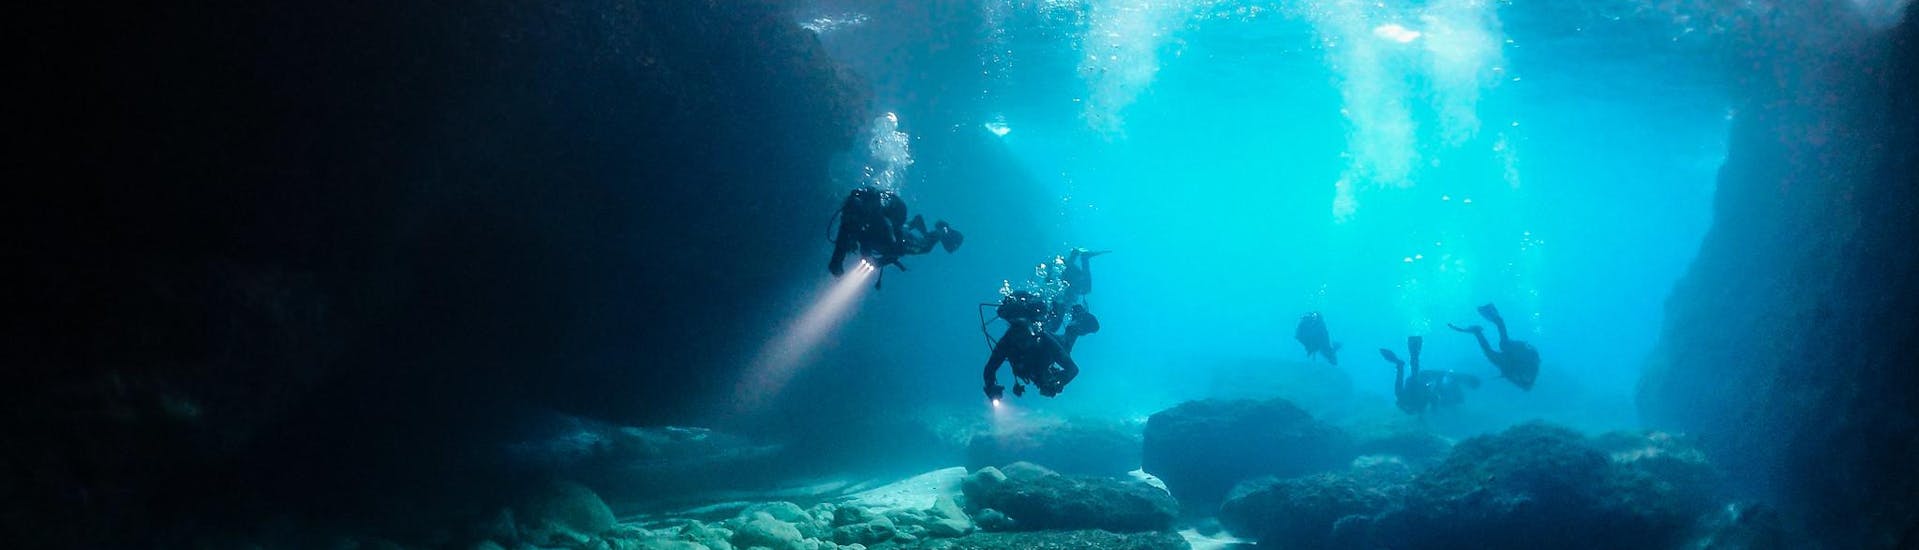 A group of certified divers during an activity in an underwater cave.